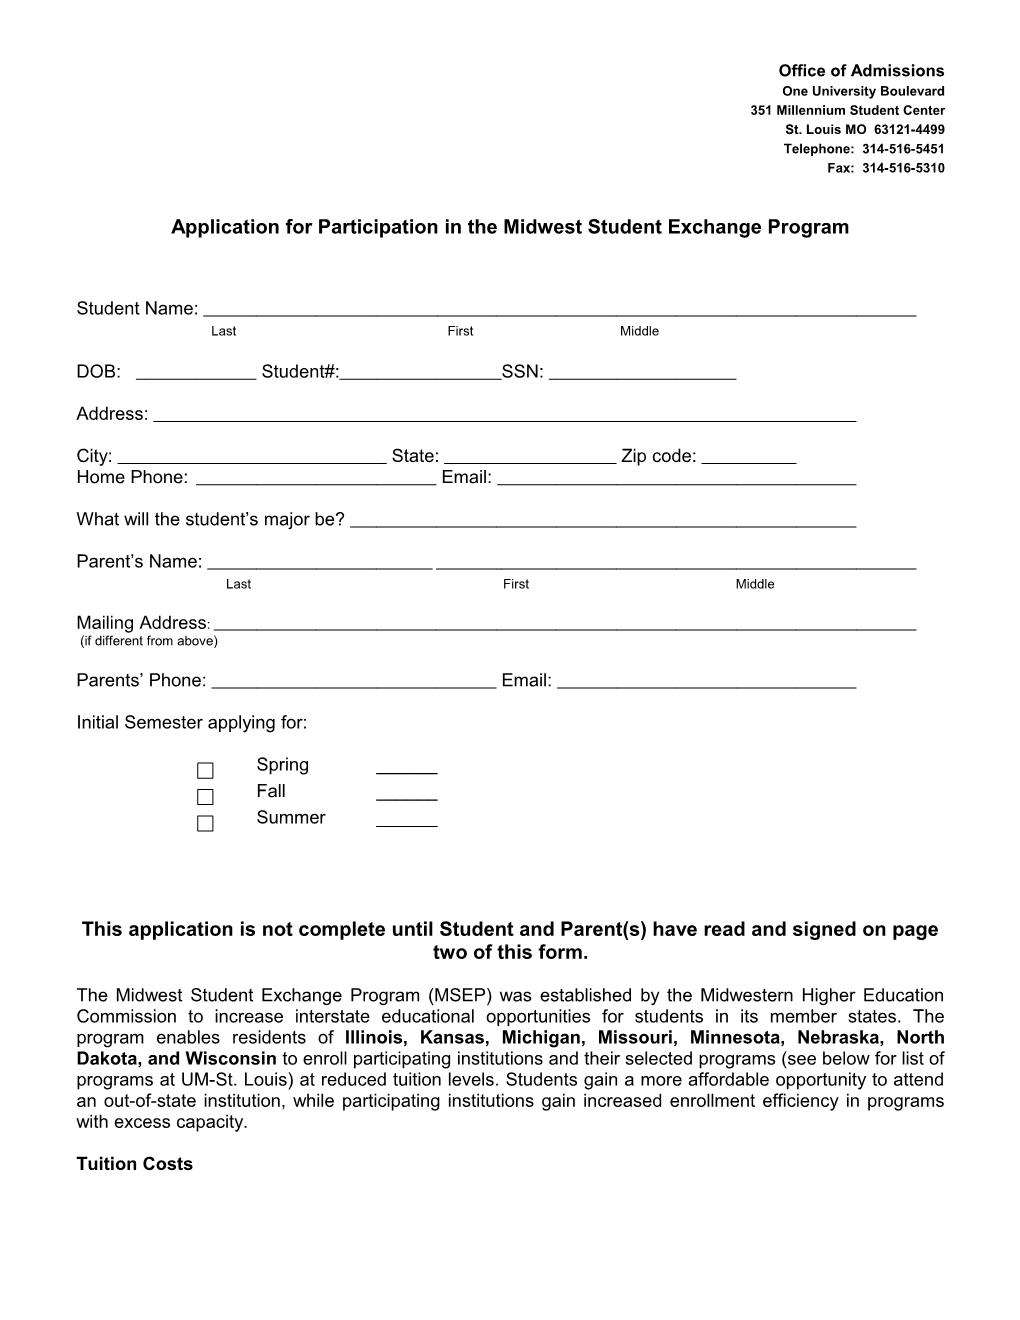 Application for Participation in the Midwest Student Exchange Program